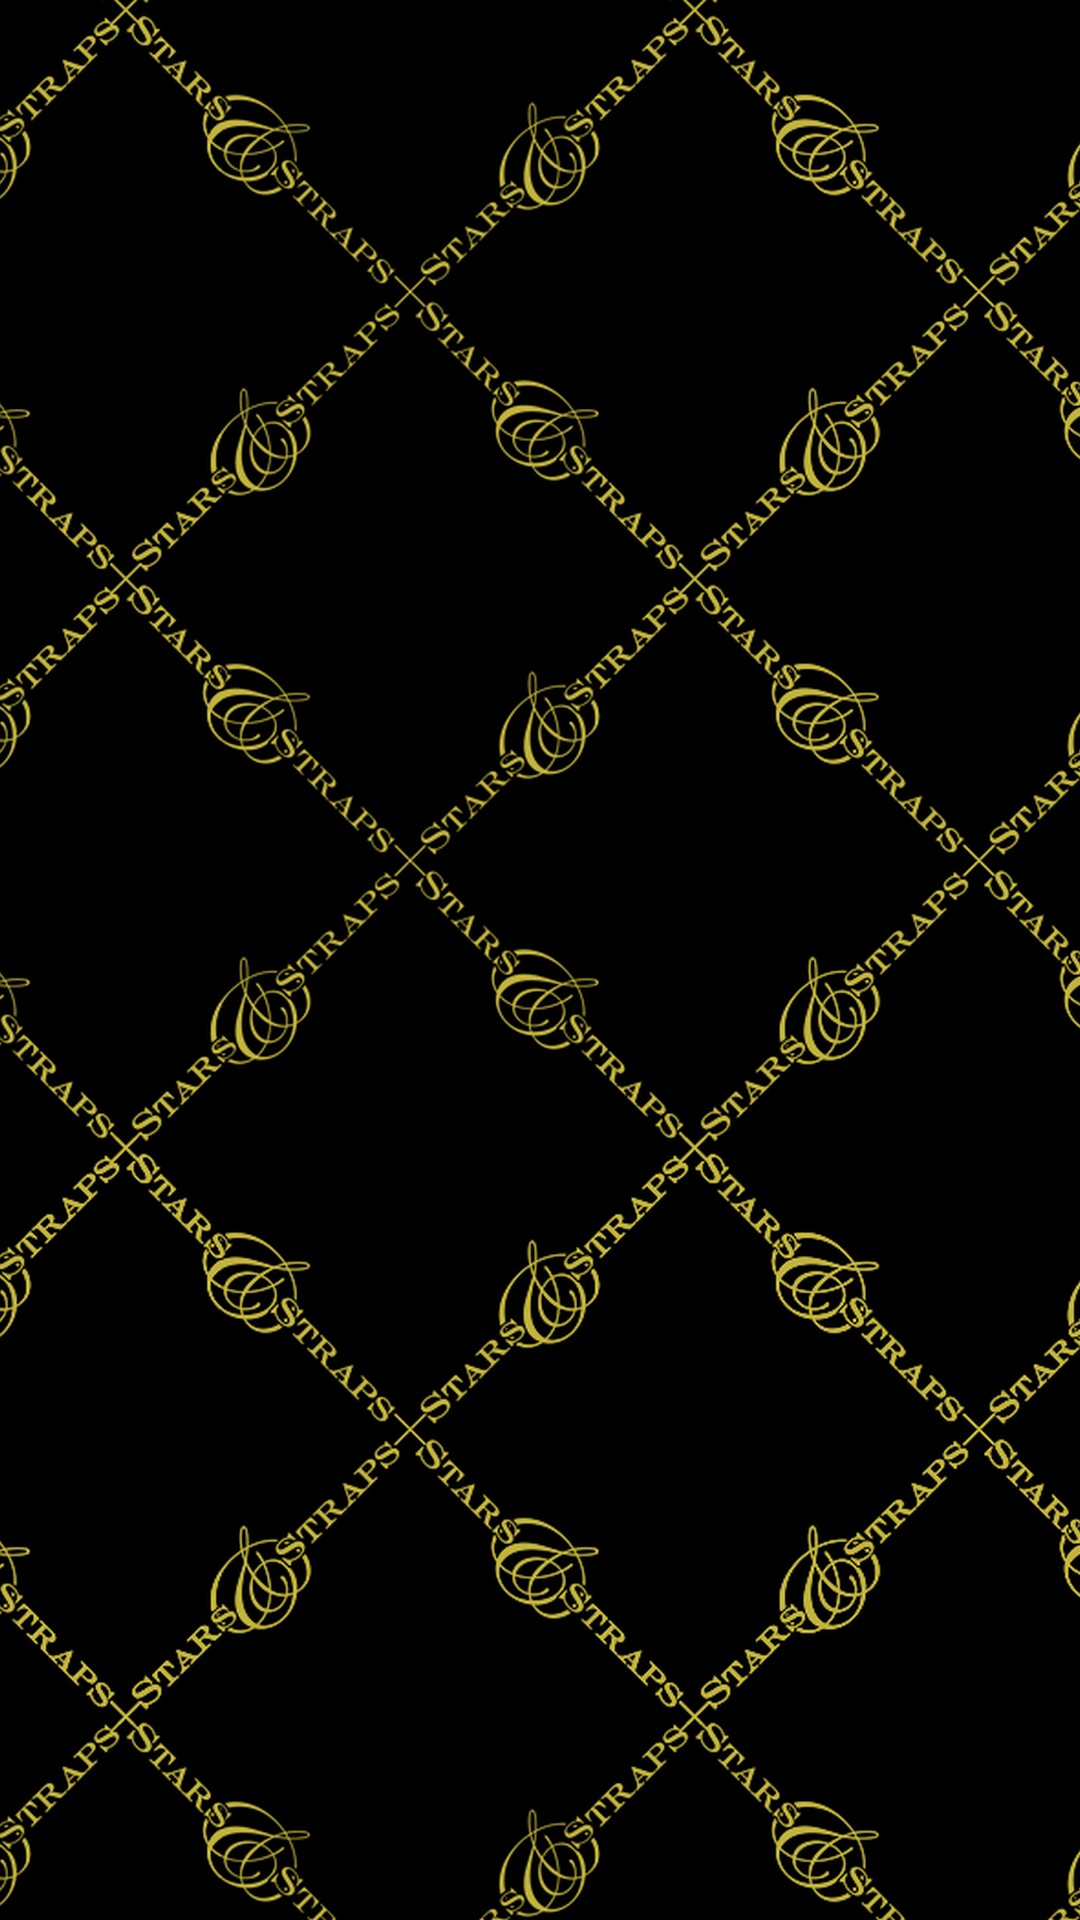 iPhone 8 Wallpaper Black and Gold resolution 1080x1920